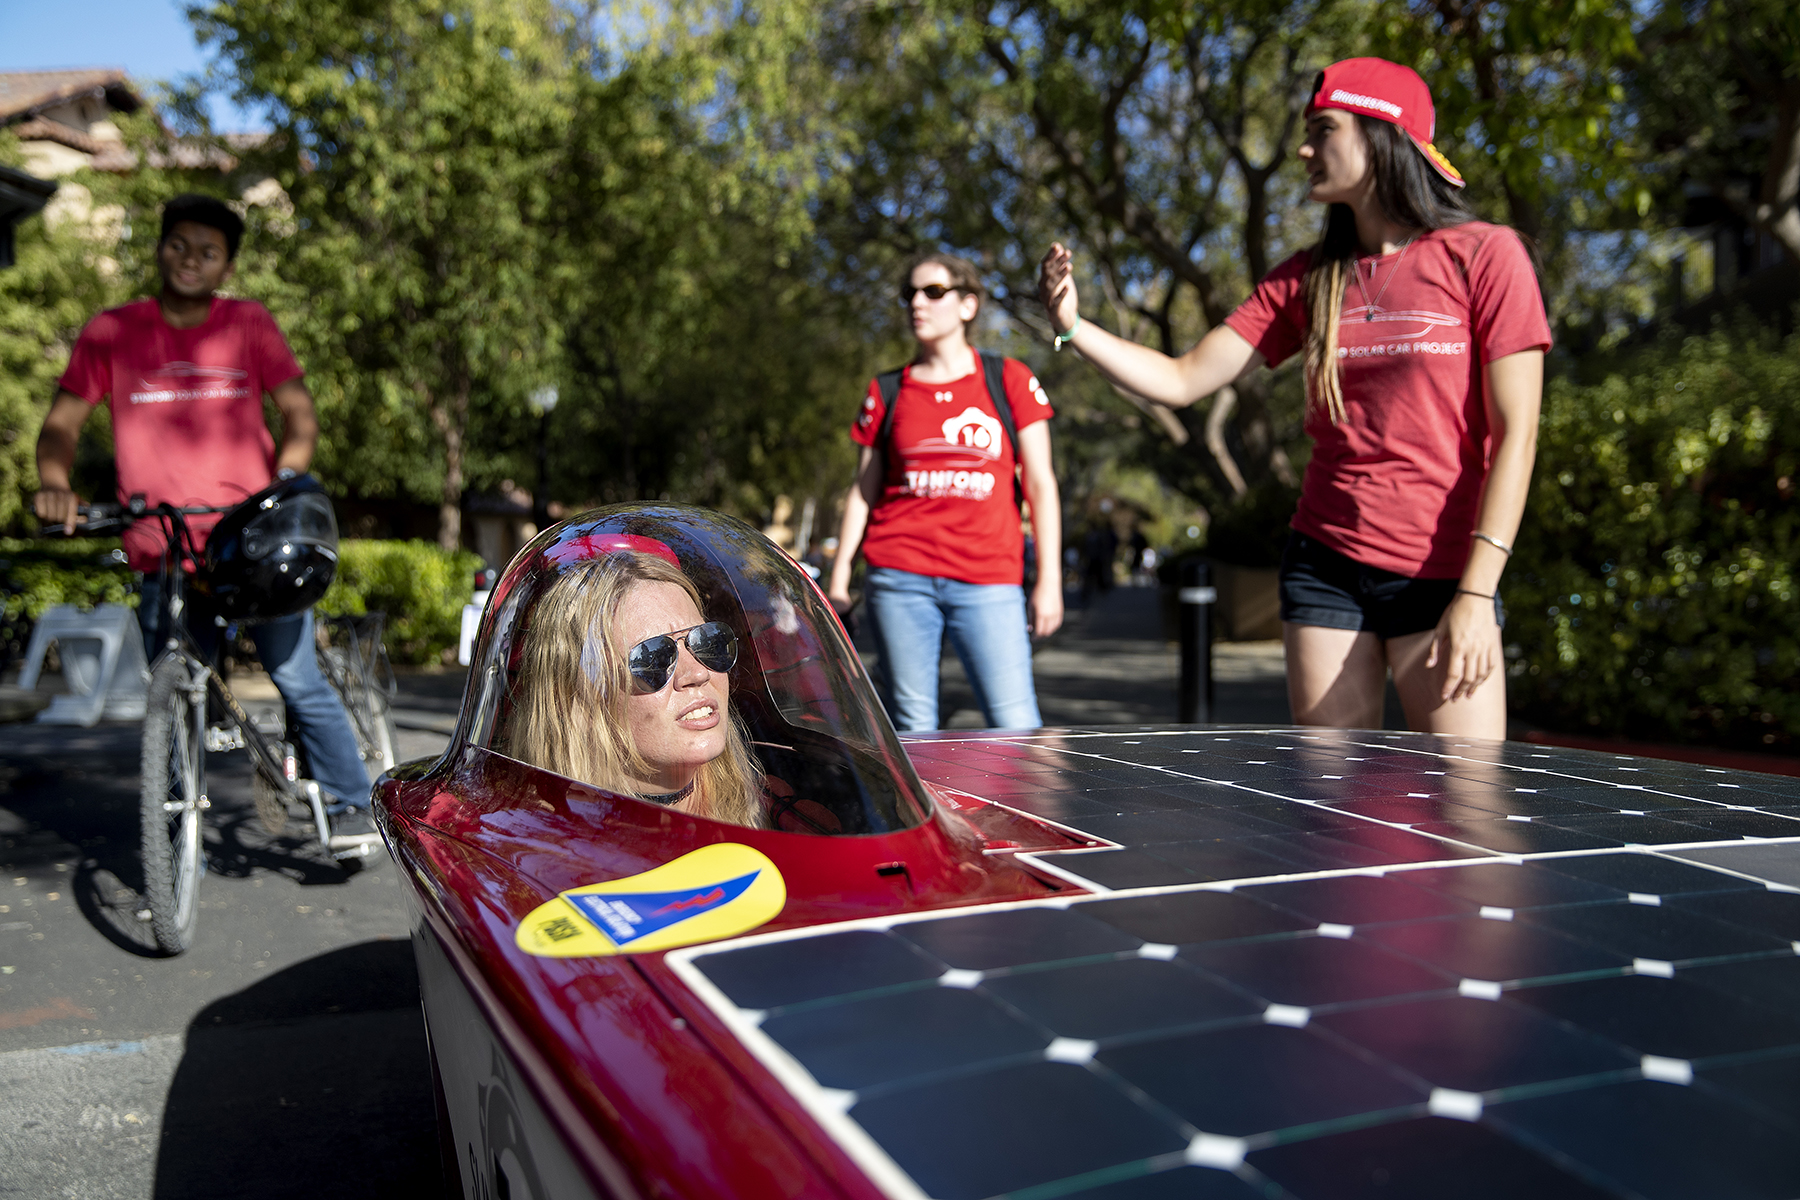 Maggie Ford, engineering director of the Stanford Solar Car Project, demos a solar car with her team at a September activities fair at Stanford University in Stanford, Calif., on September 28, 2018. Every two years, the student team designs, builds and races a solar car in the Bridgestone World Solar Challenge across the Australian Outback. Stanford University has had a large influence on the development of Silicon Valley. 